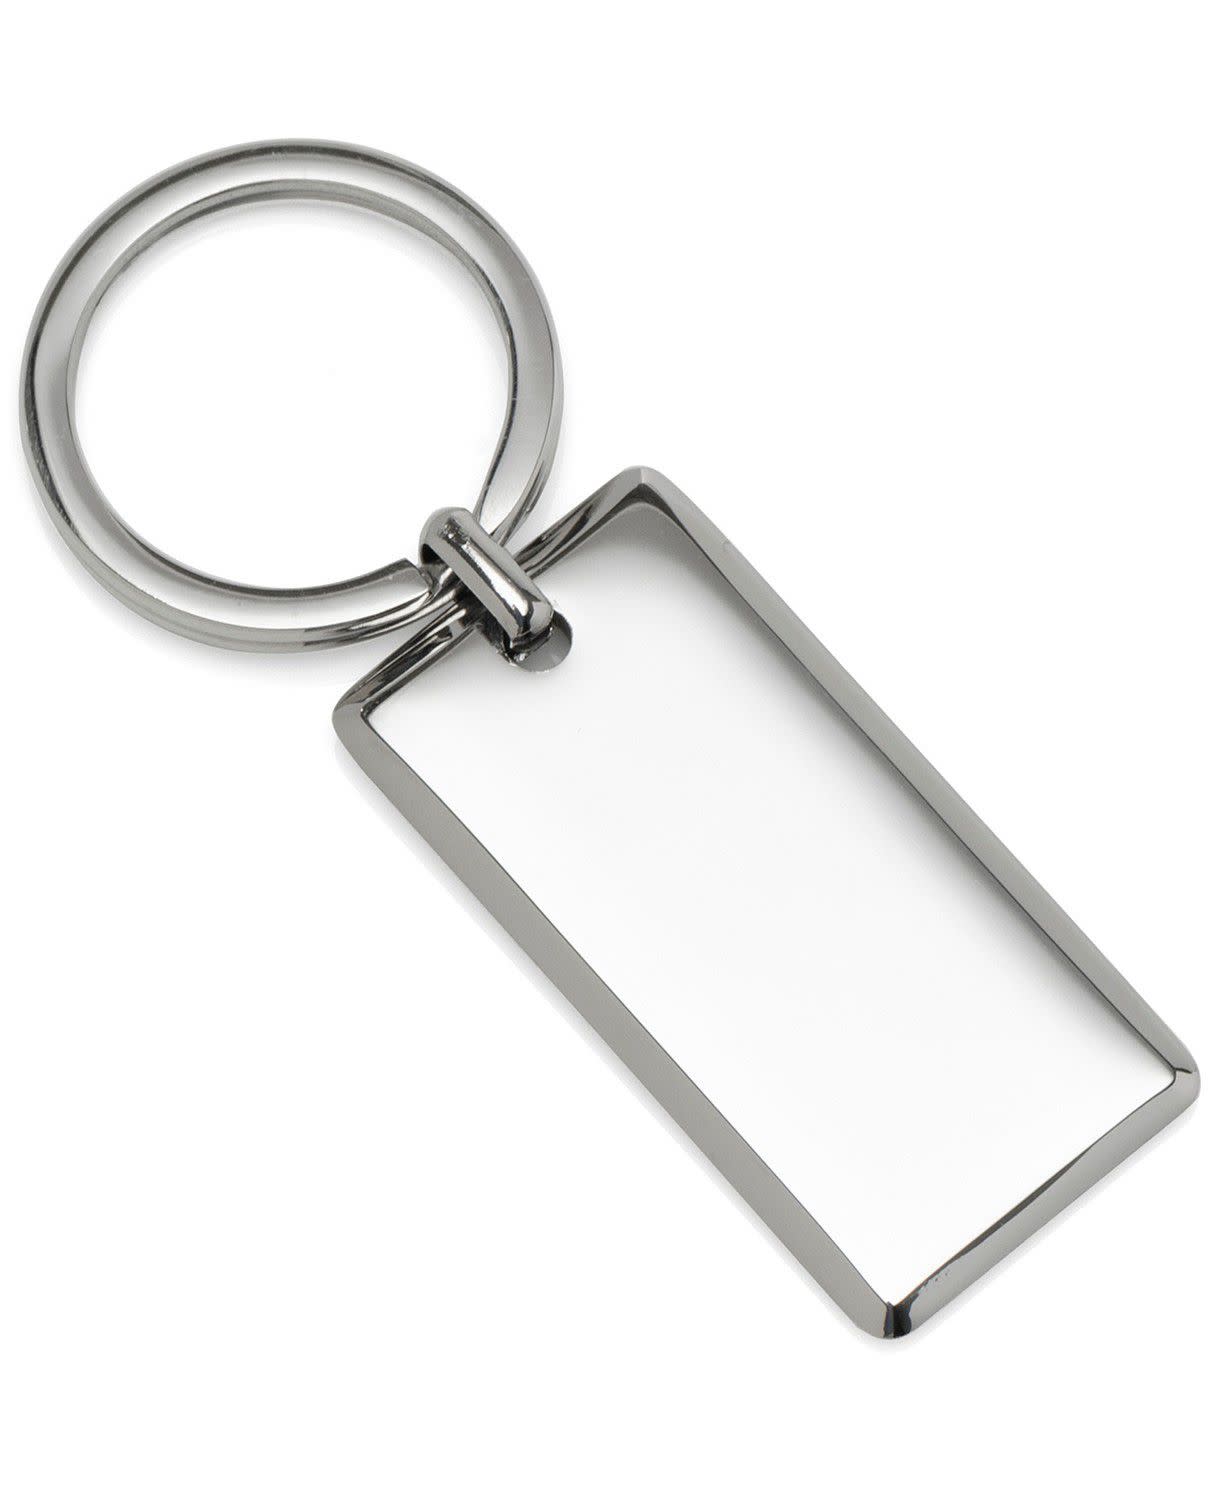 Ox & Bull Trading Co. Stainless Steel Key Chain